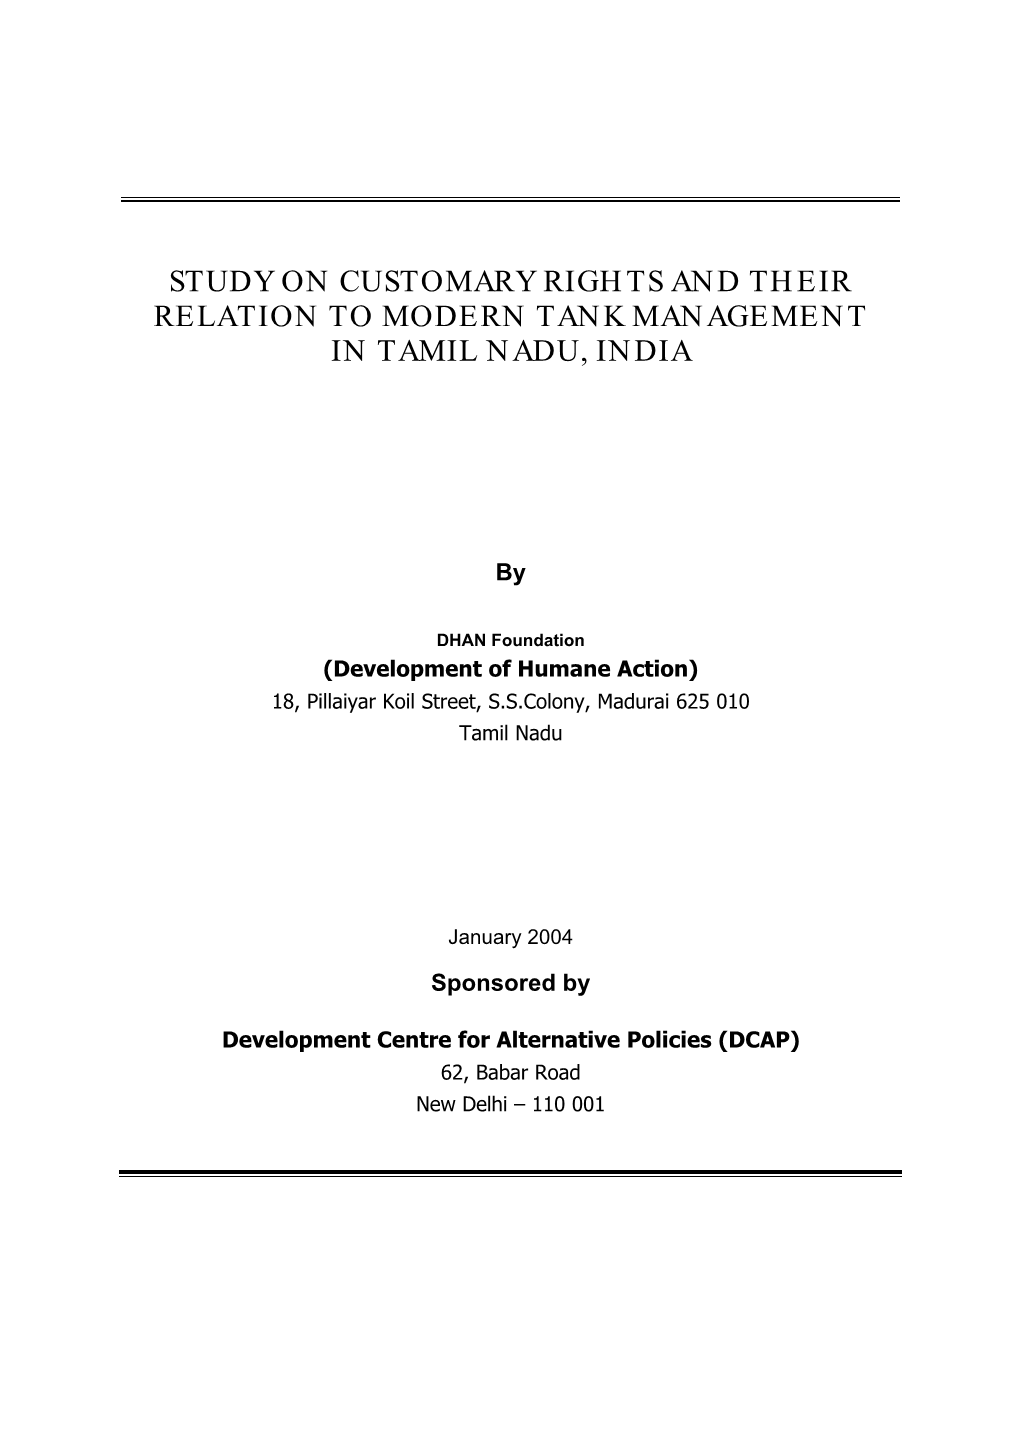 Study on Customary Rights and Their Relation to Modern Tank Management in Tamil Nadu, India